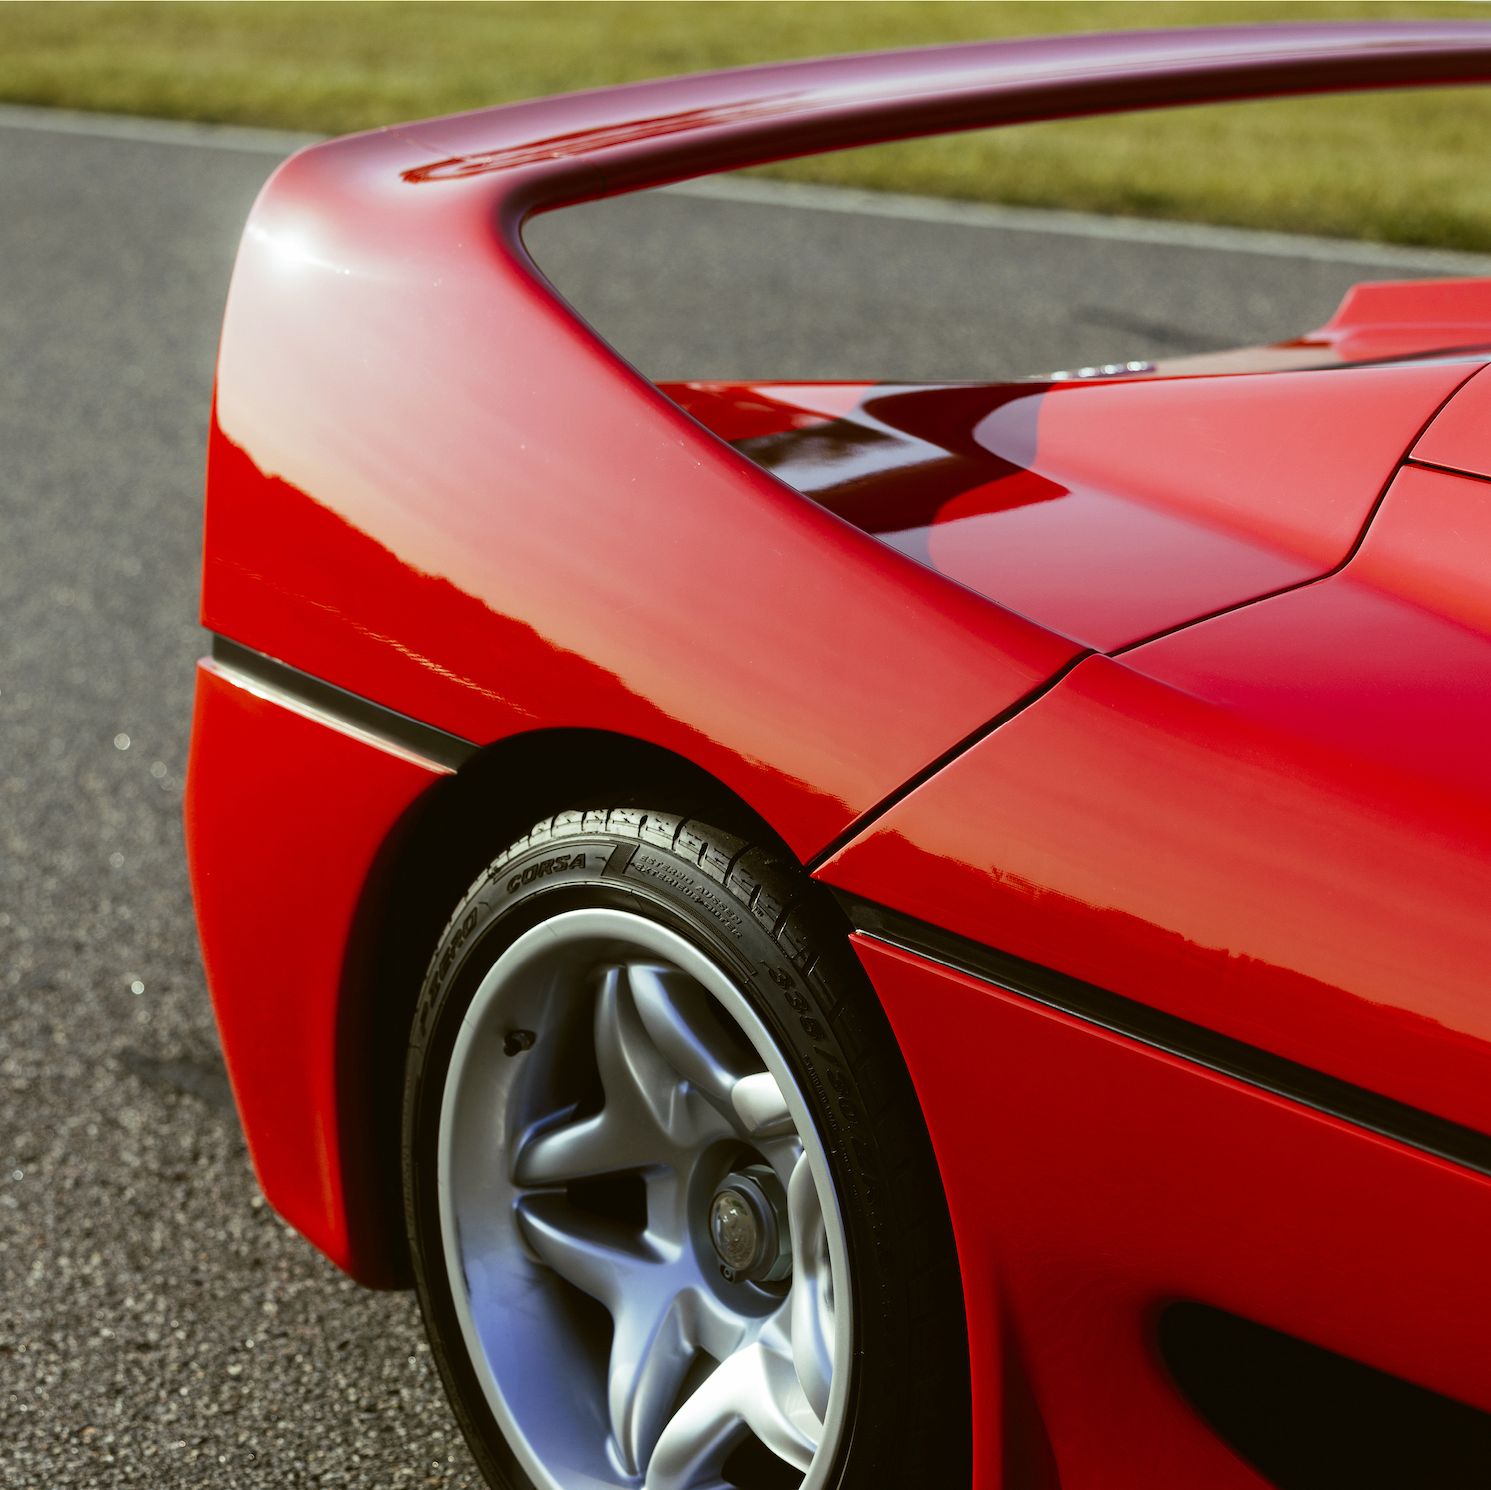 The Ferrari F50 Was Panned When It Debuted. Now It Represents Everything We Desire.